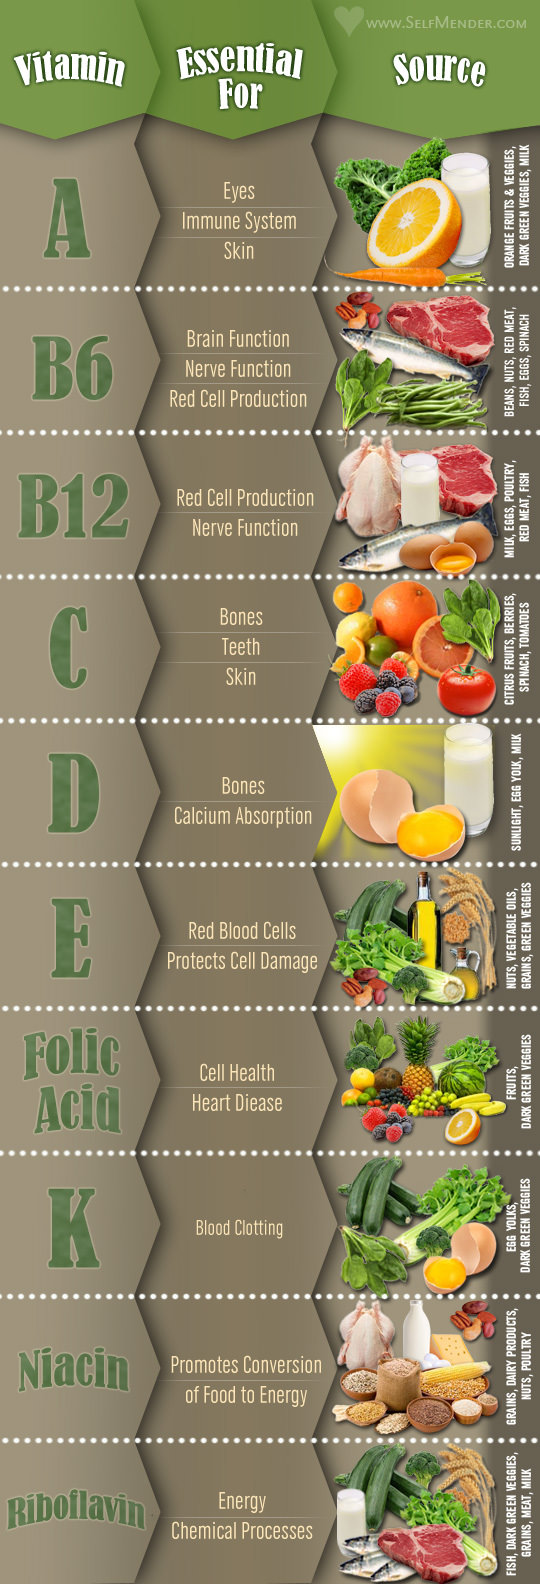 guide to vitamins